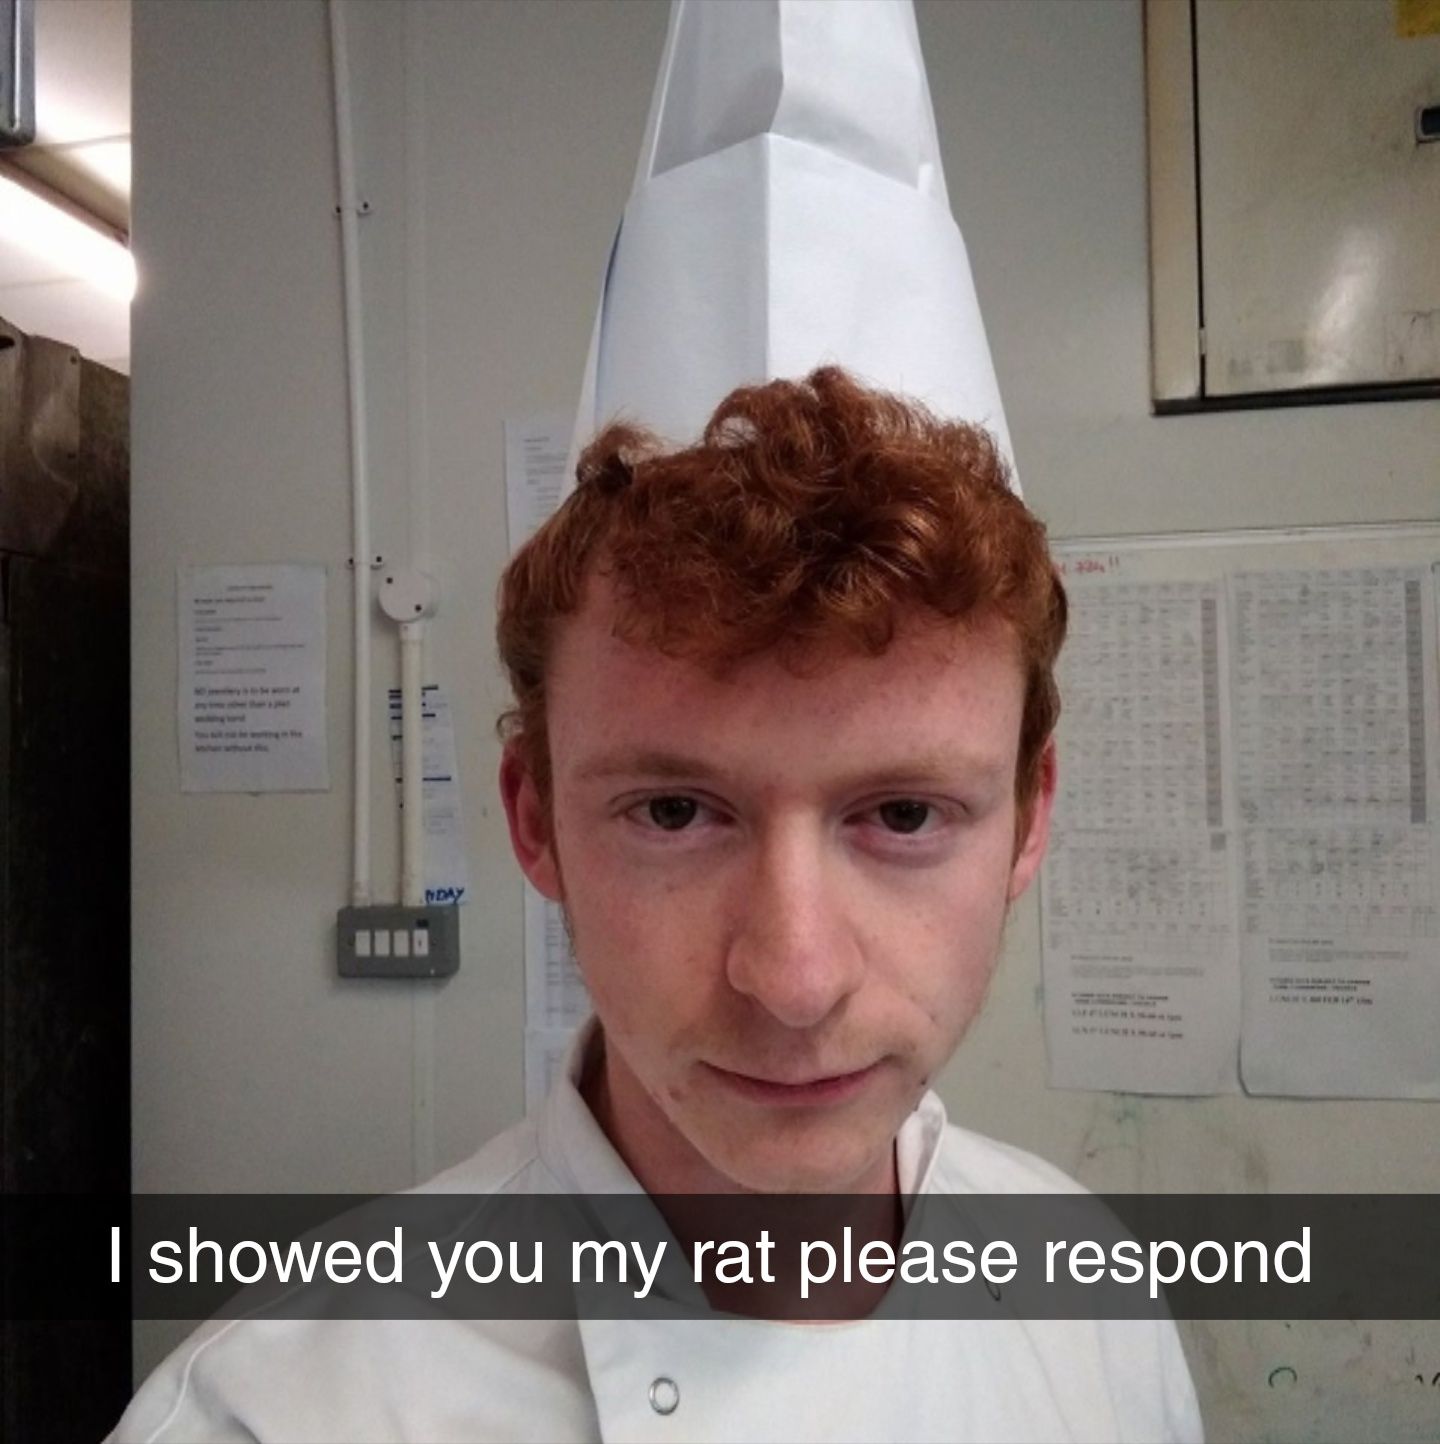 Thought I'd make a meme out of the ratatouille guy from the other day